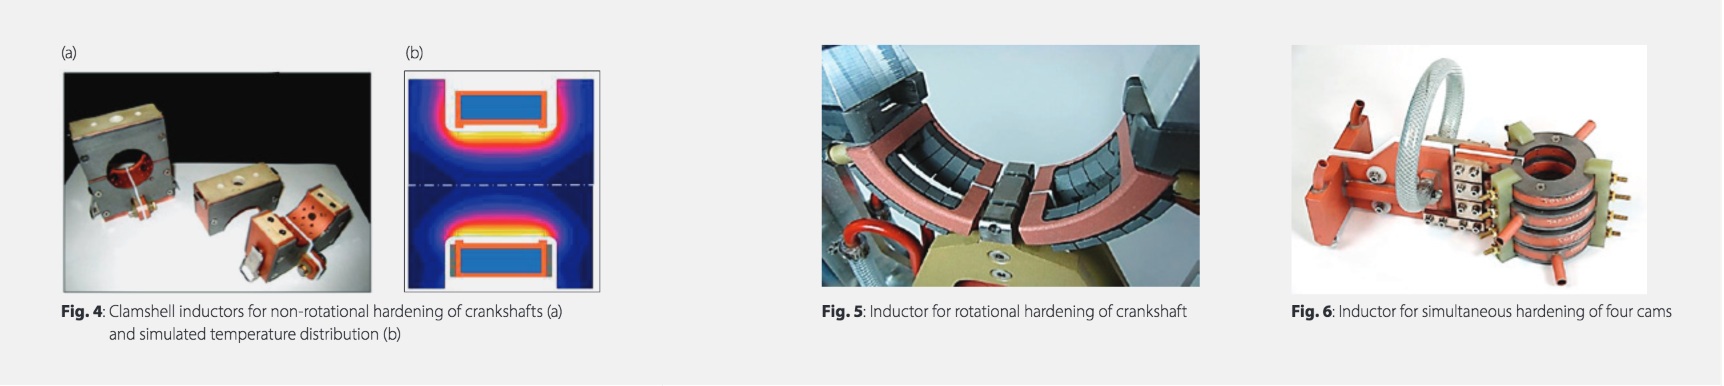 Fluxtrol | Magnetic Flux Control in Induction Systems - Figures 4, 5, 6: 4. Clamshell inductors for non-rotational hardening of crankshafts (a) and simulated temperature distribution (b). 5. Inductor for rotational hardening of crankshaft. 6. Inductor for simultaneous hardening of four cams.